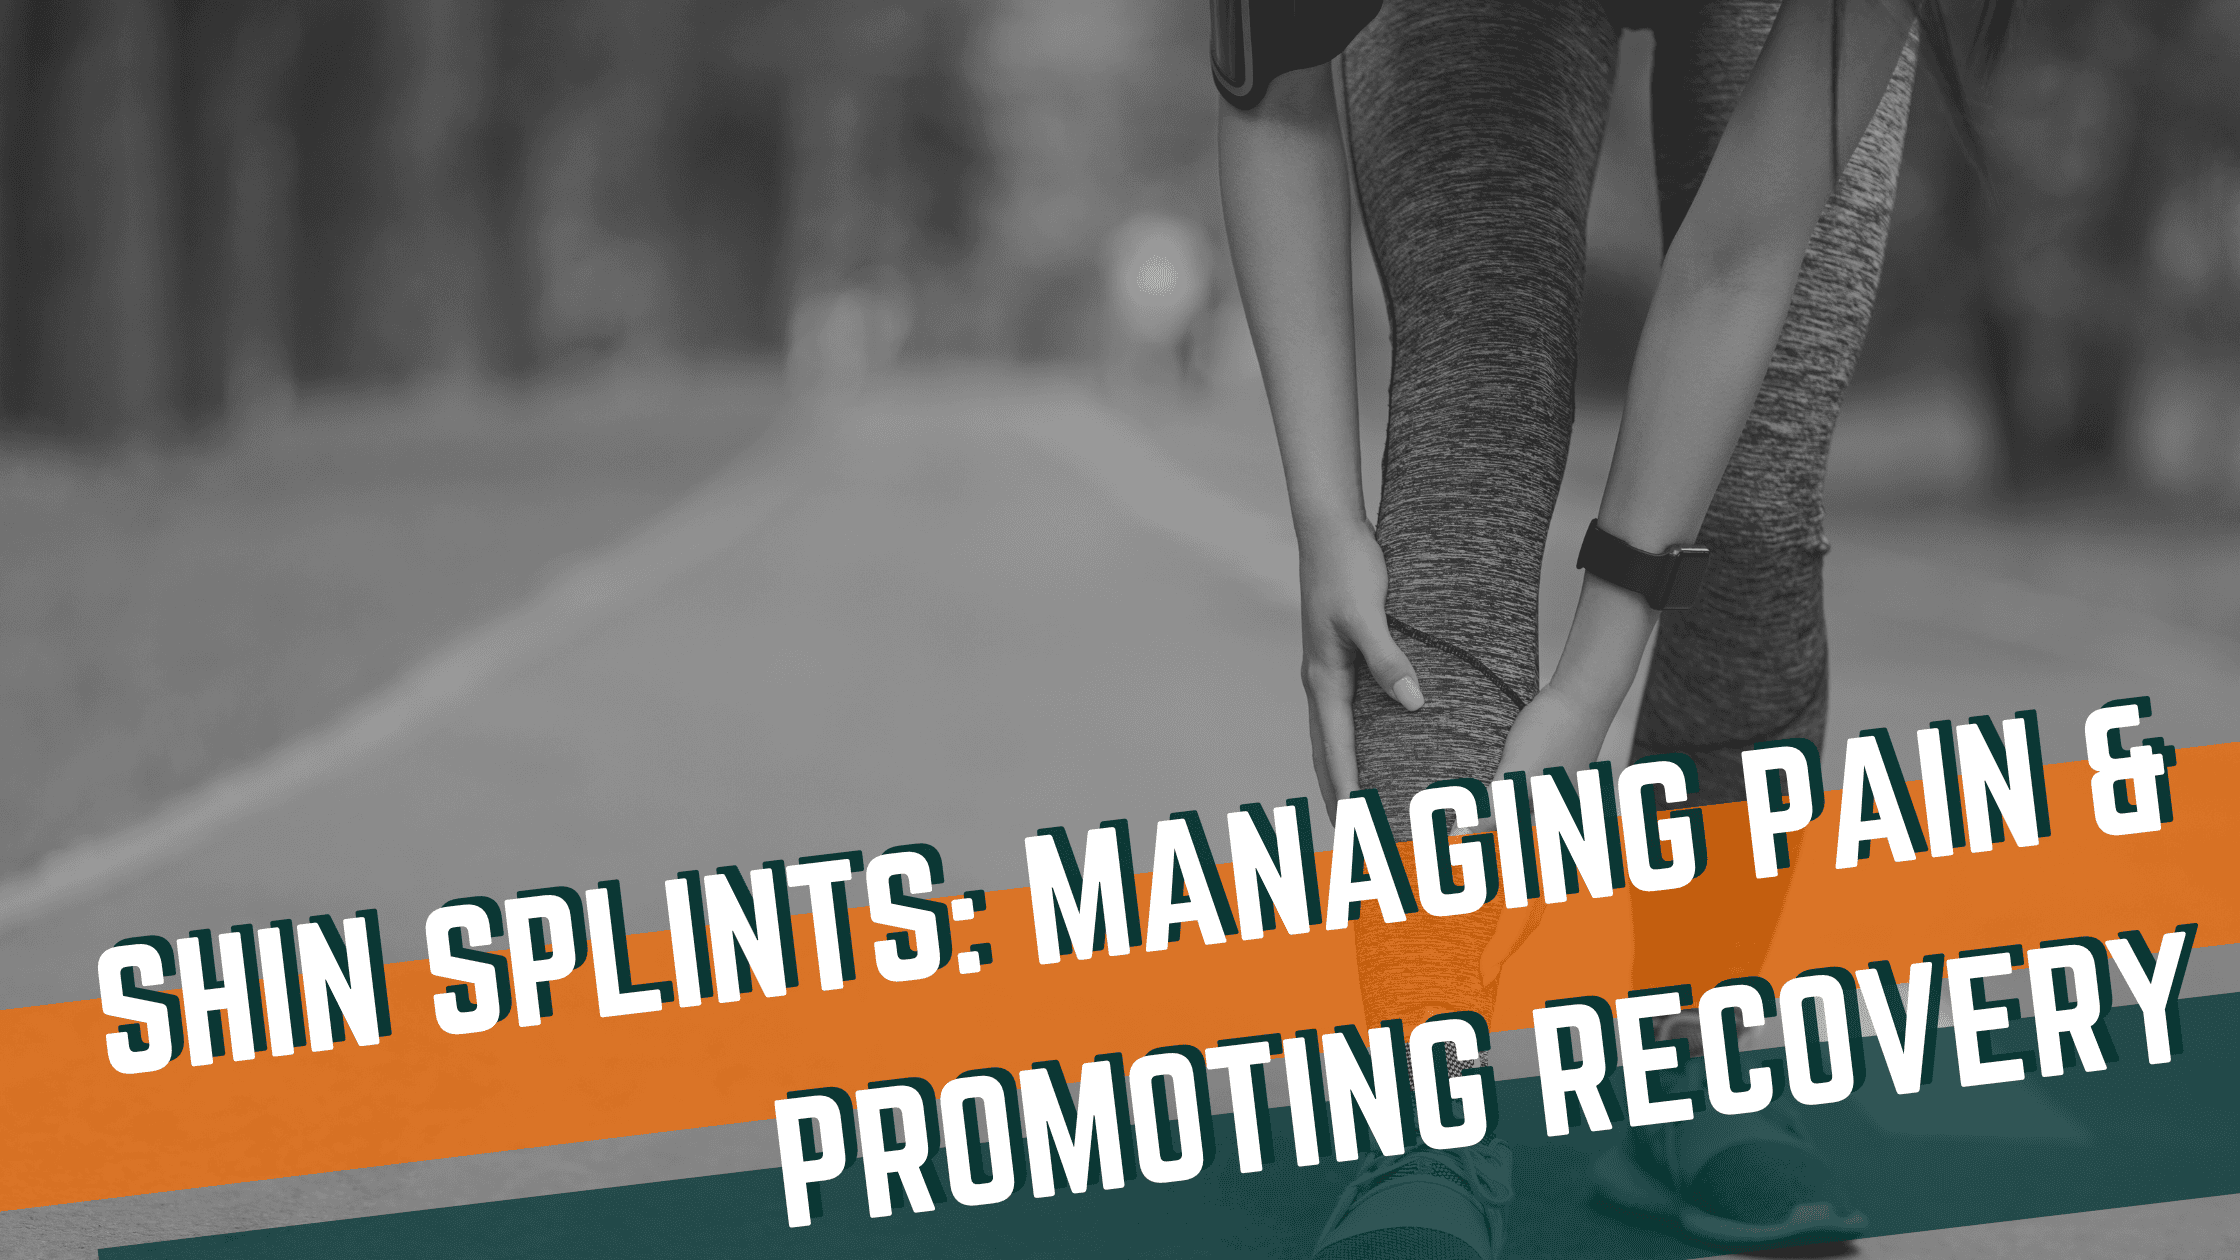 Featured image for “Shin Splints: Managing Pain and Promoting Recovery in Runners”